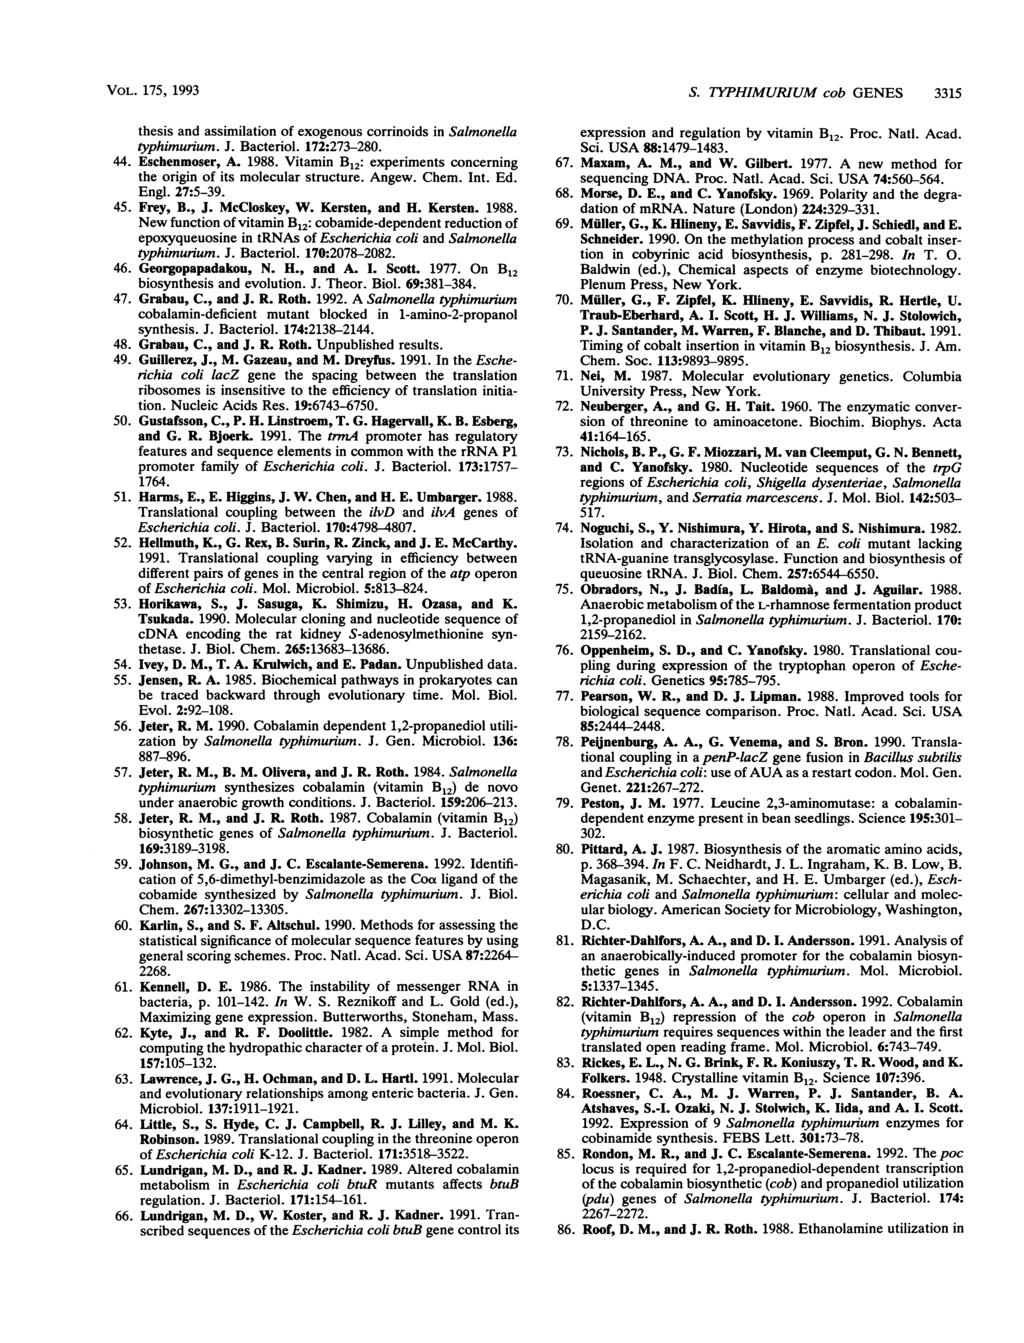 VOL. 175, 1993 thesis and assimilation of exogenous corrinoids in Salmonella typhimurium. J. Bacteriol. 172:273-280. 44. Eschenmoser, A. 1988.